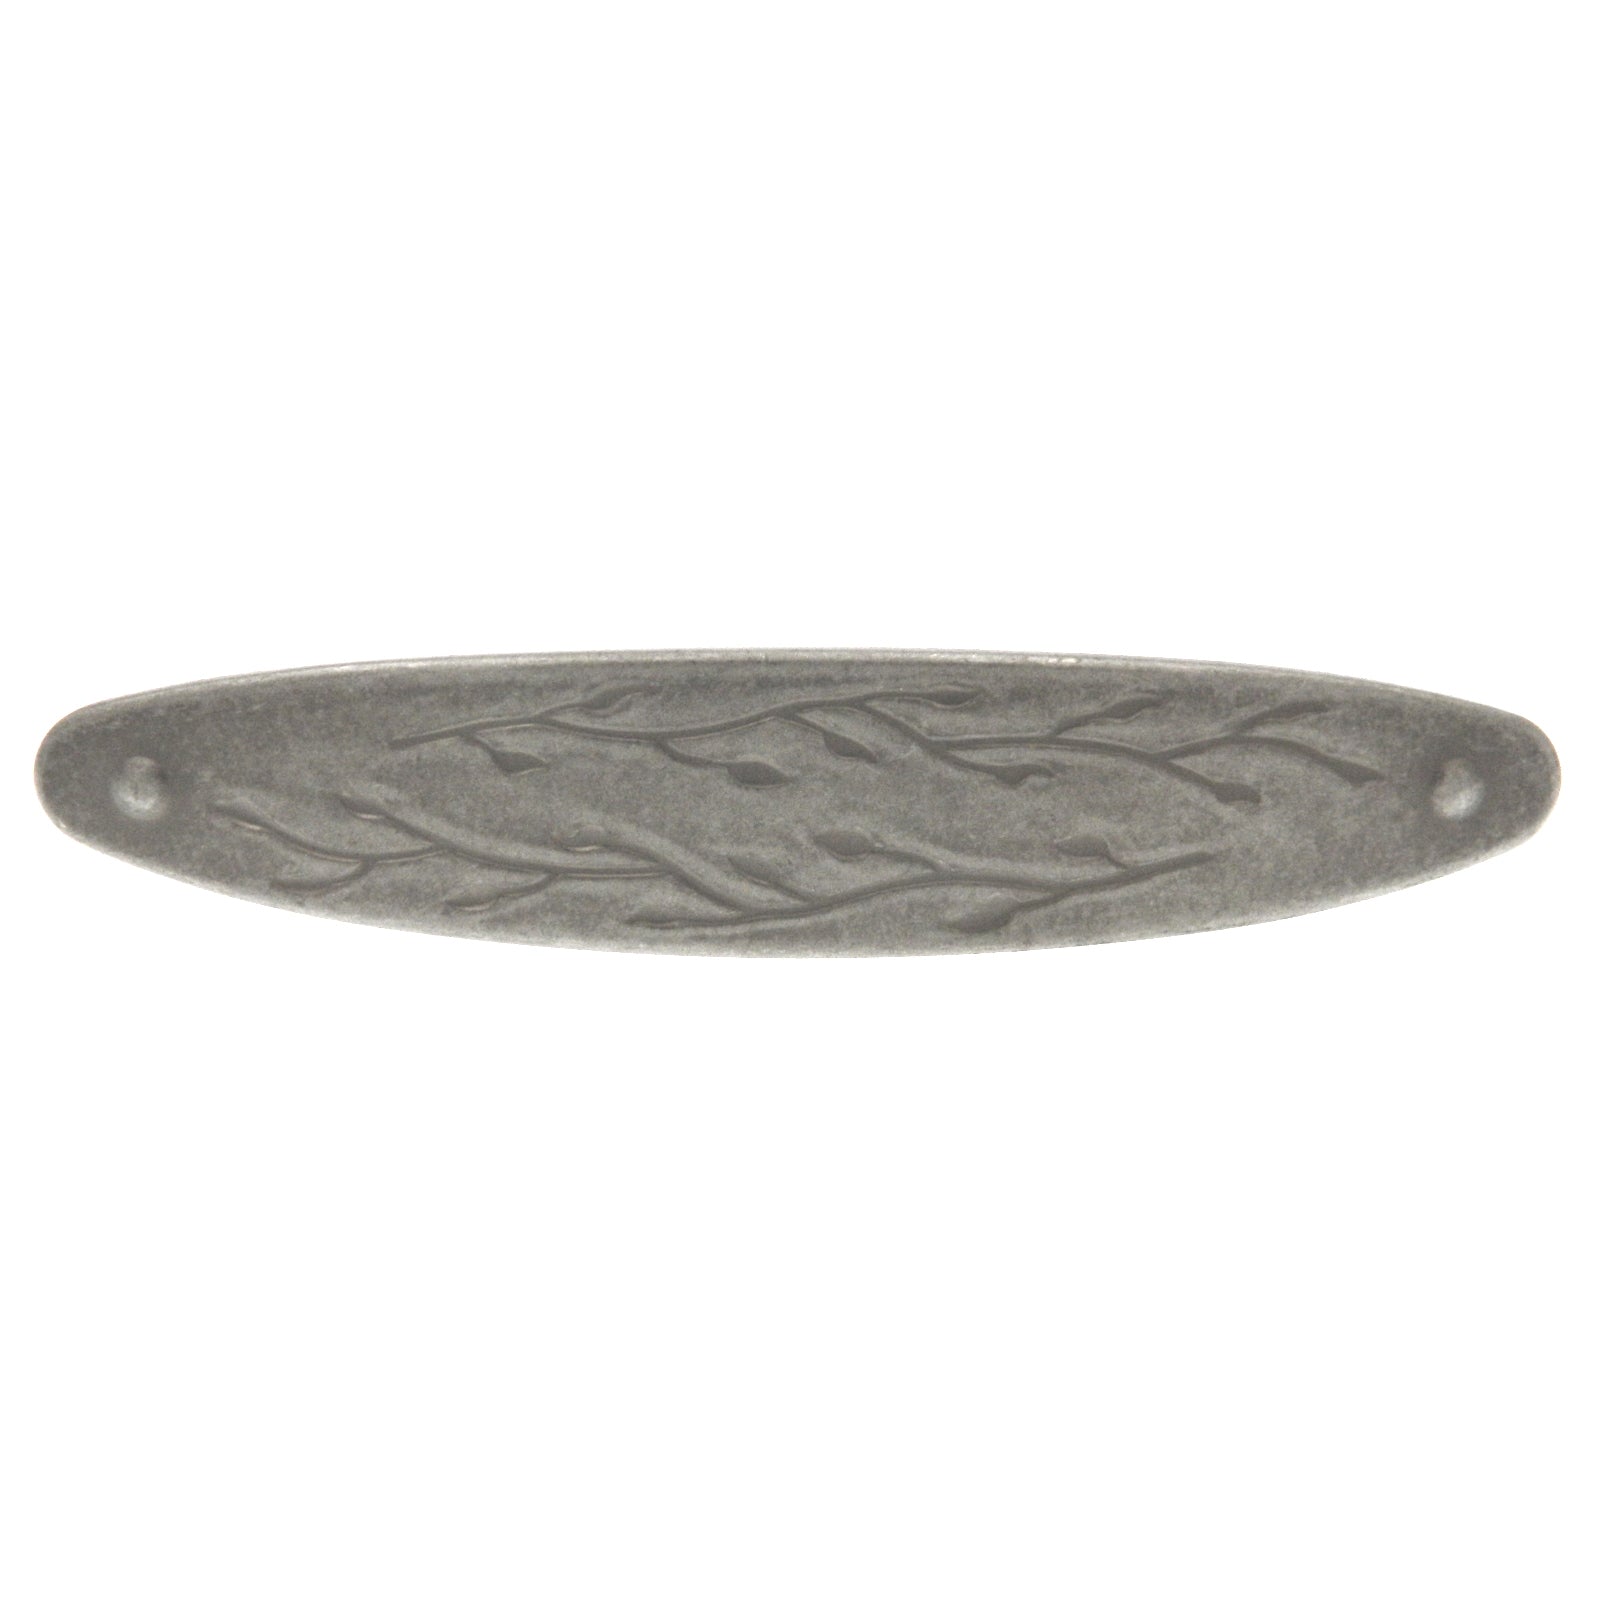 Amerock Inspirations Weathered Nickel 3" Center to Center Leaf Drawer Bar Pull BP4443WN